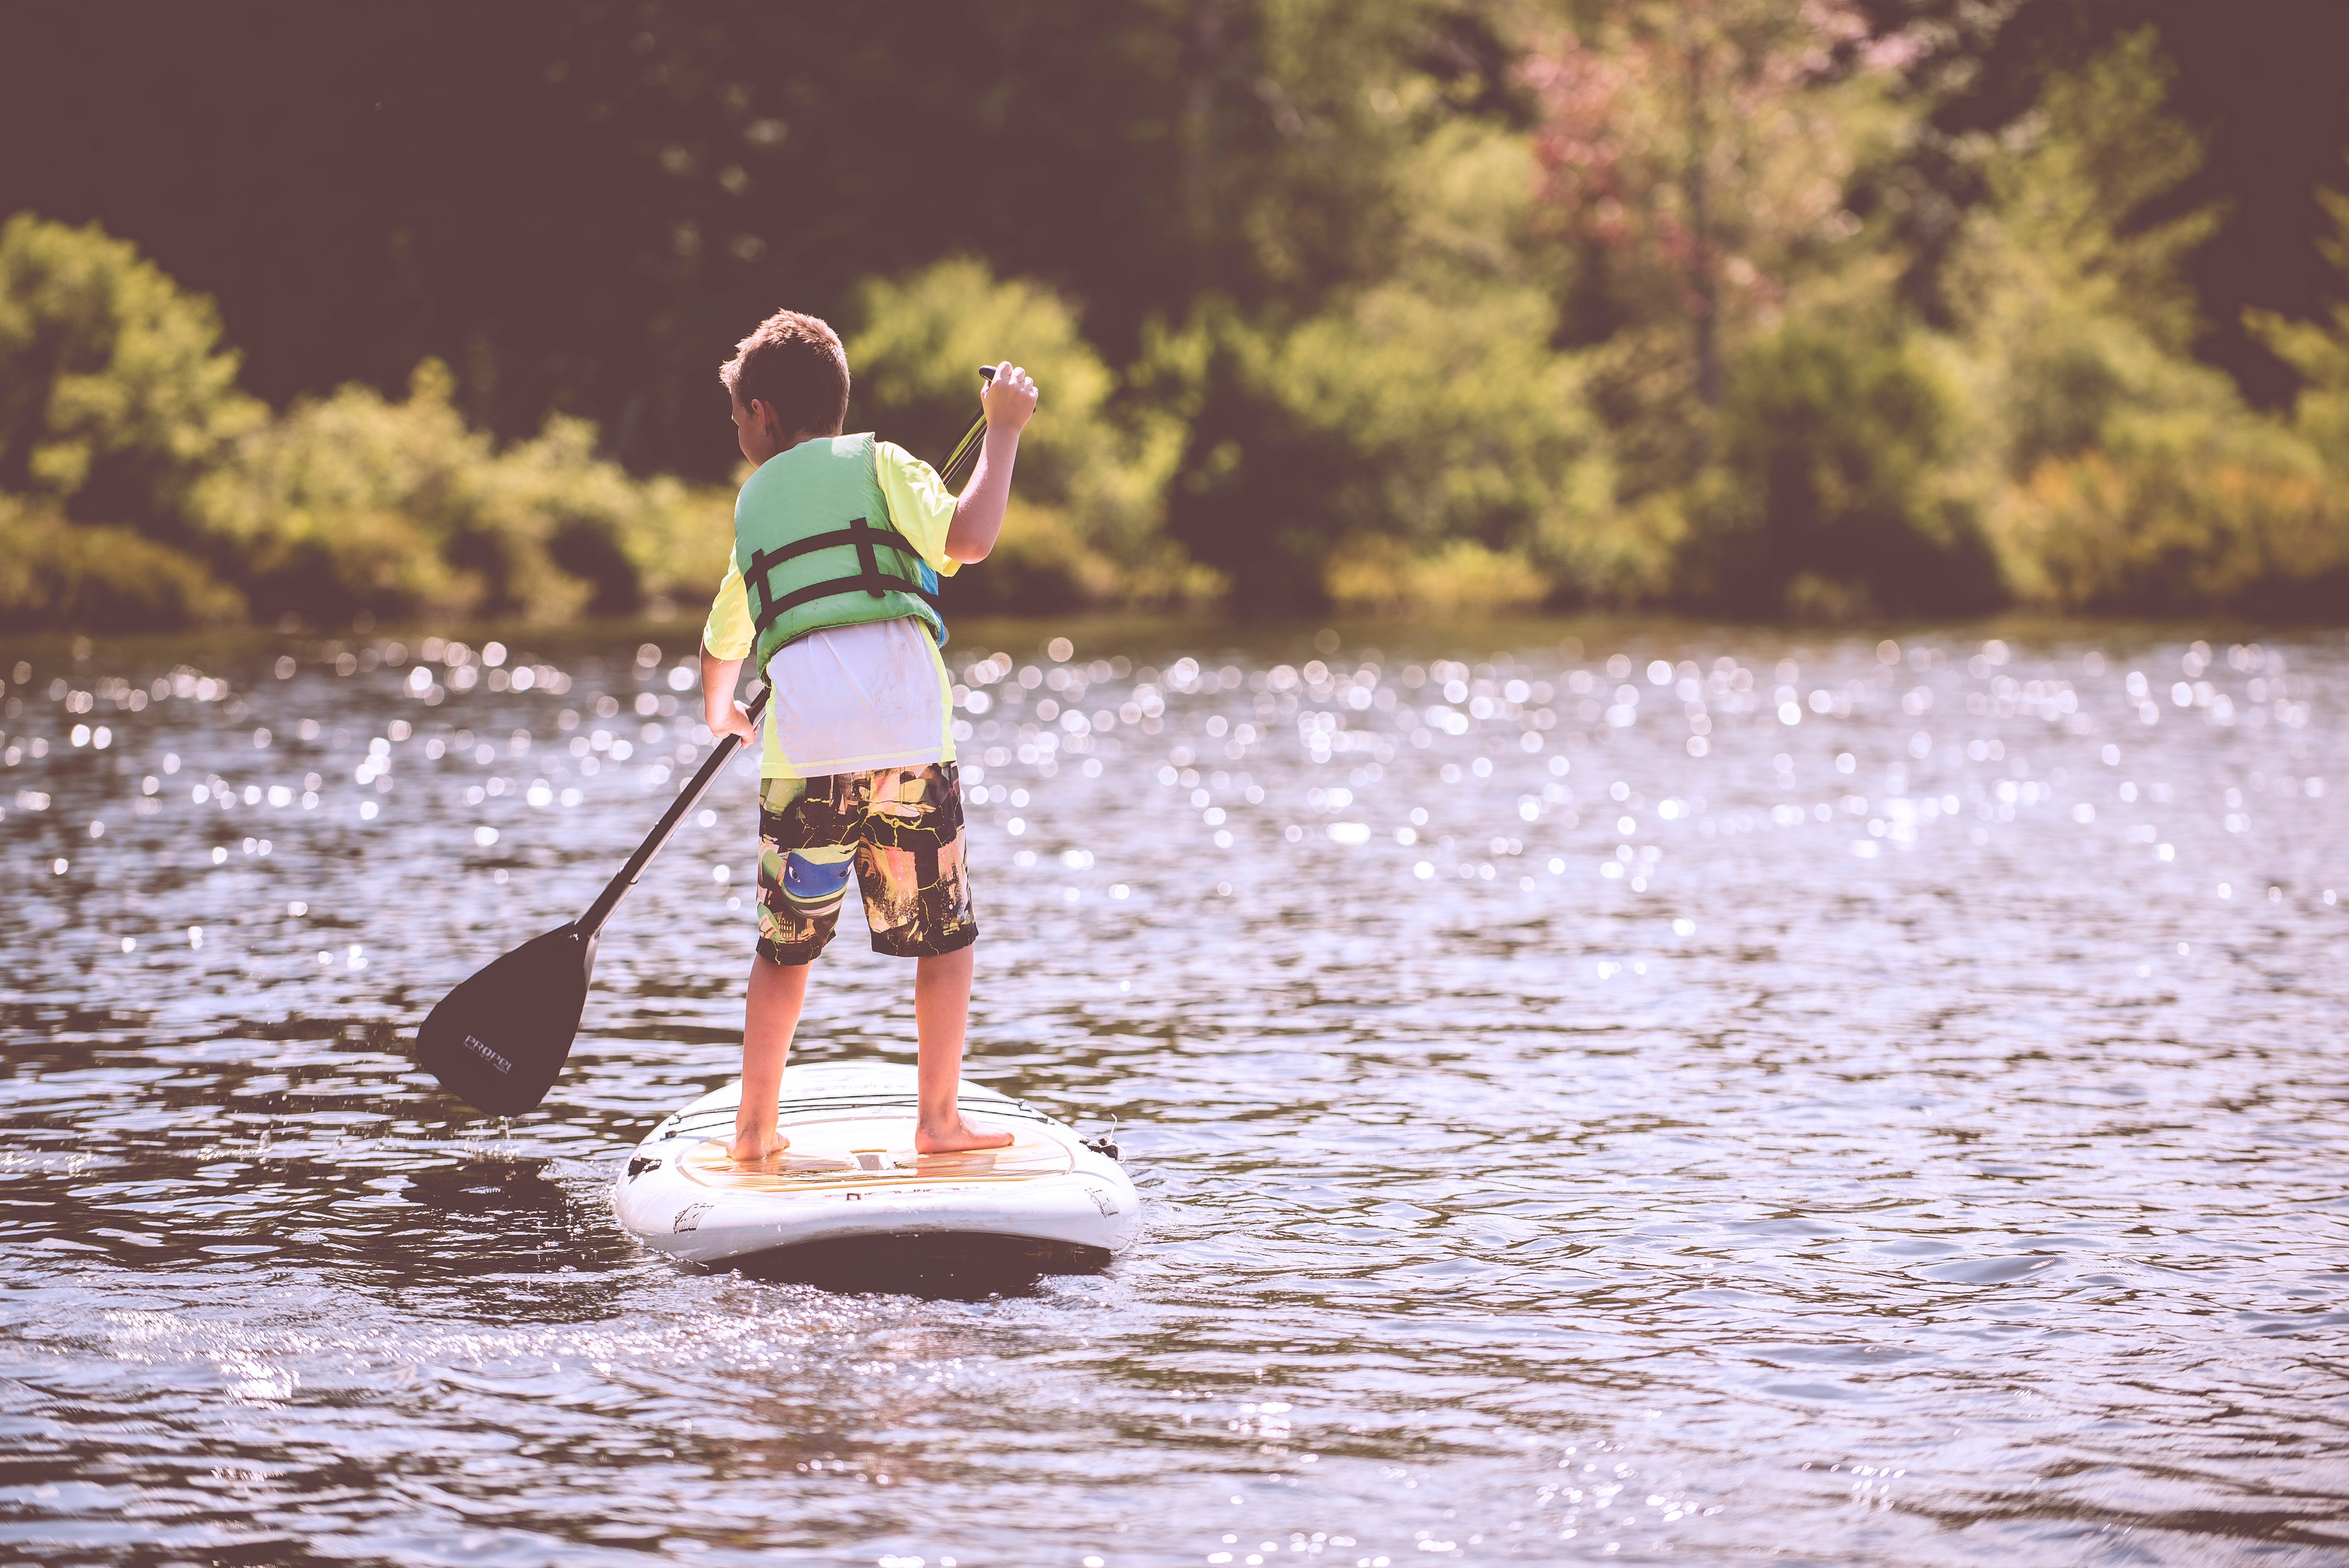 Young boy wearing life jacket and standing on paddleboard in a lake